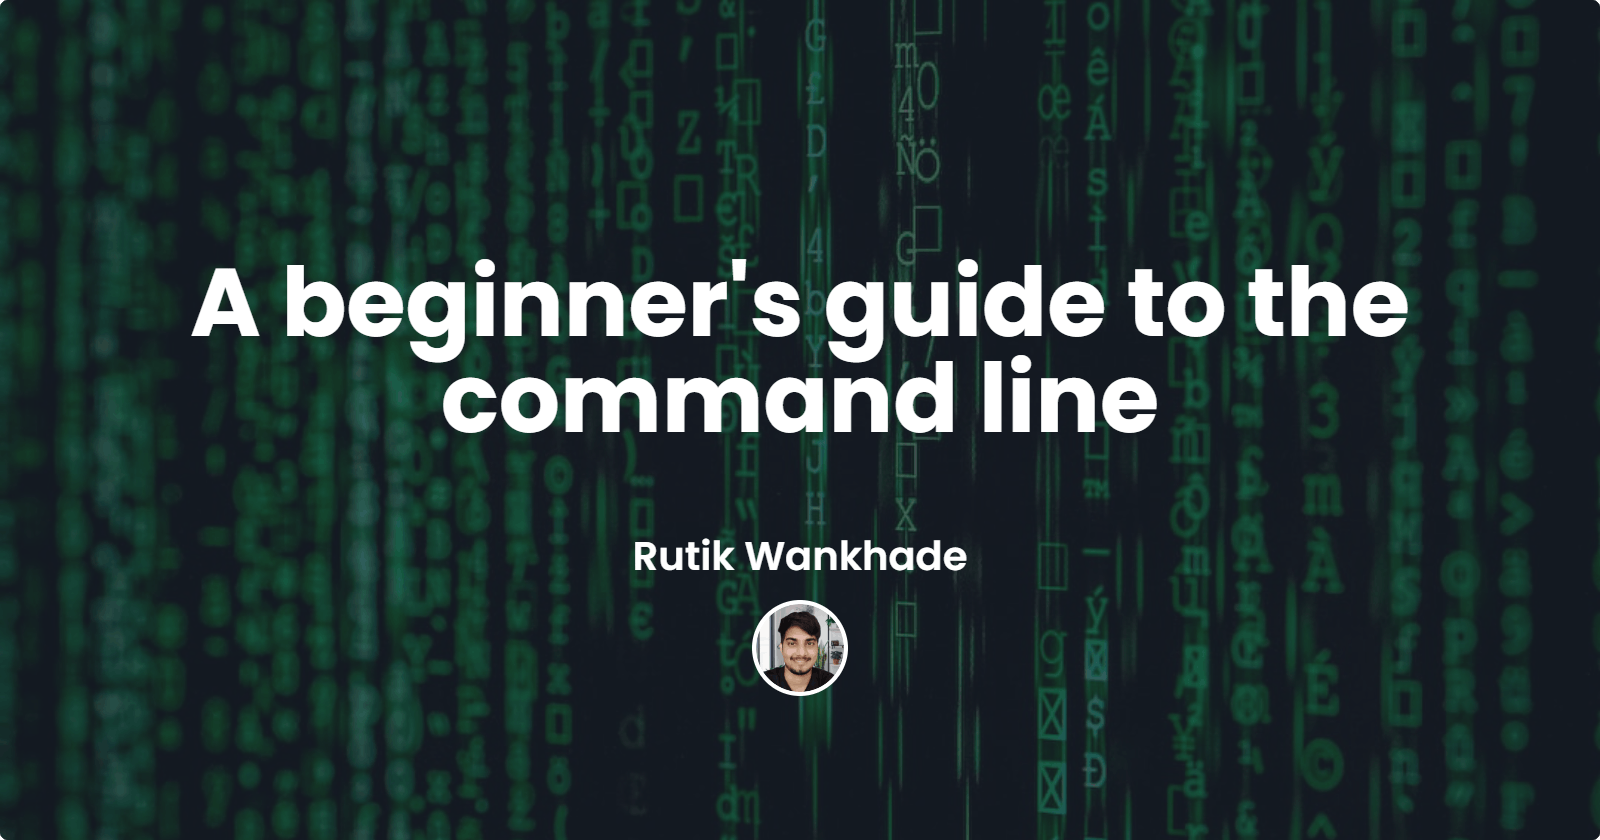 A beginner's guide to the command line